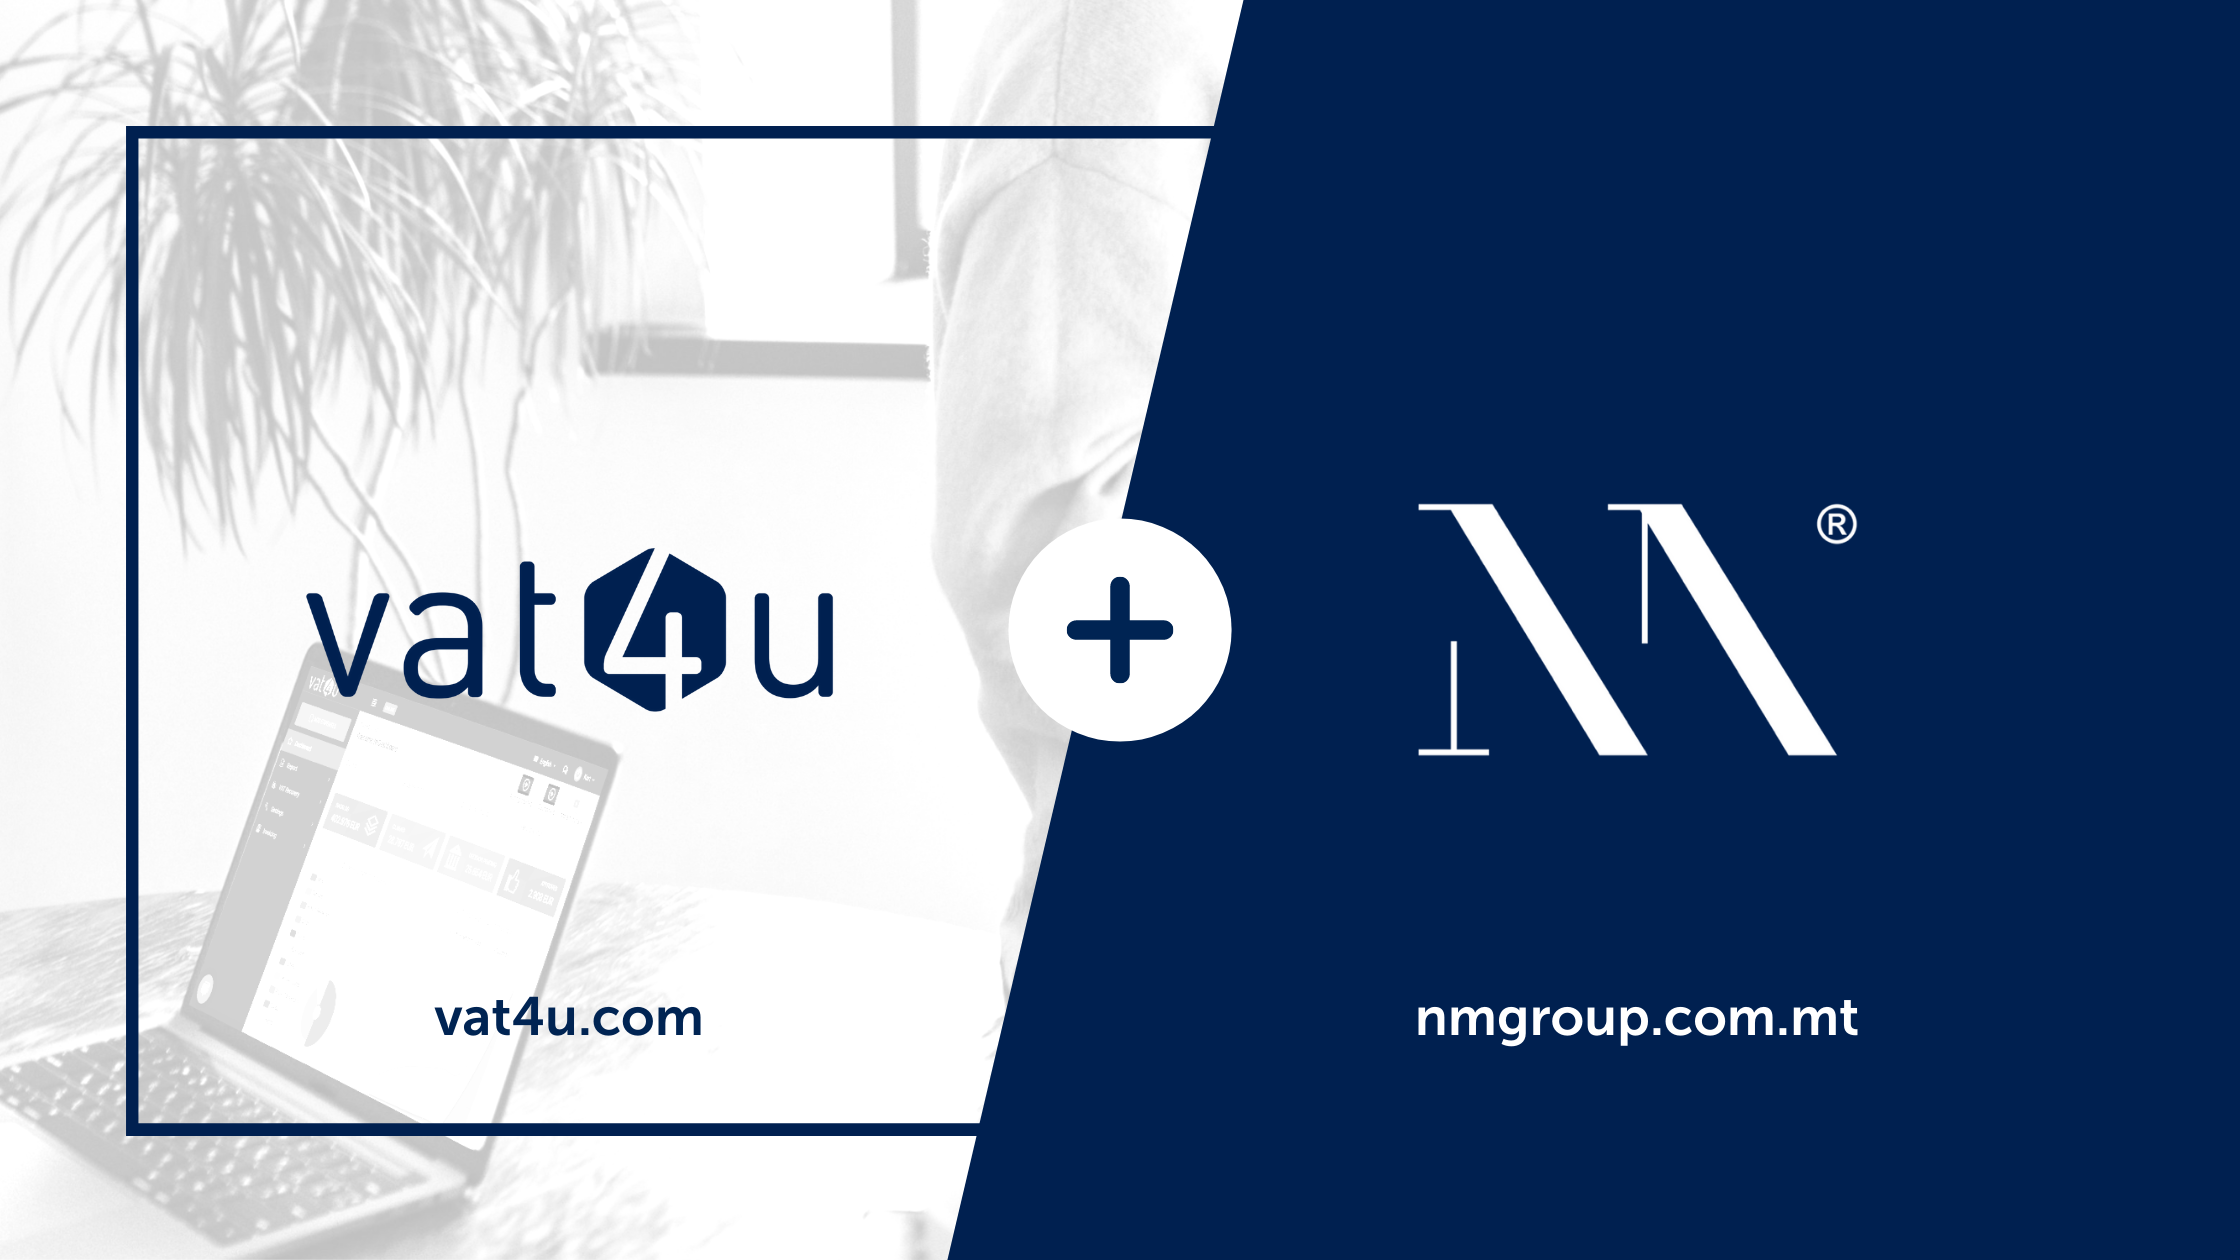 Why we've partnered with NM Group